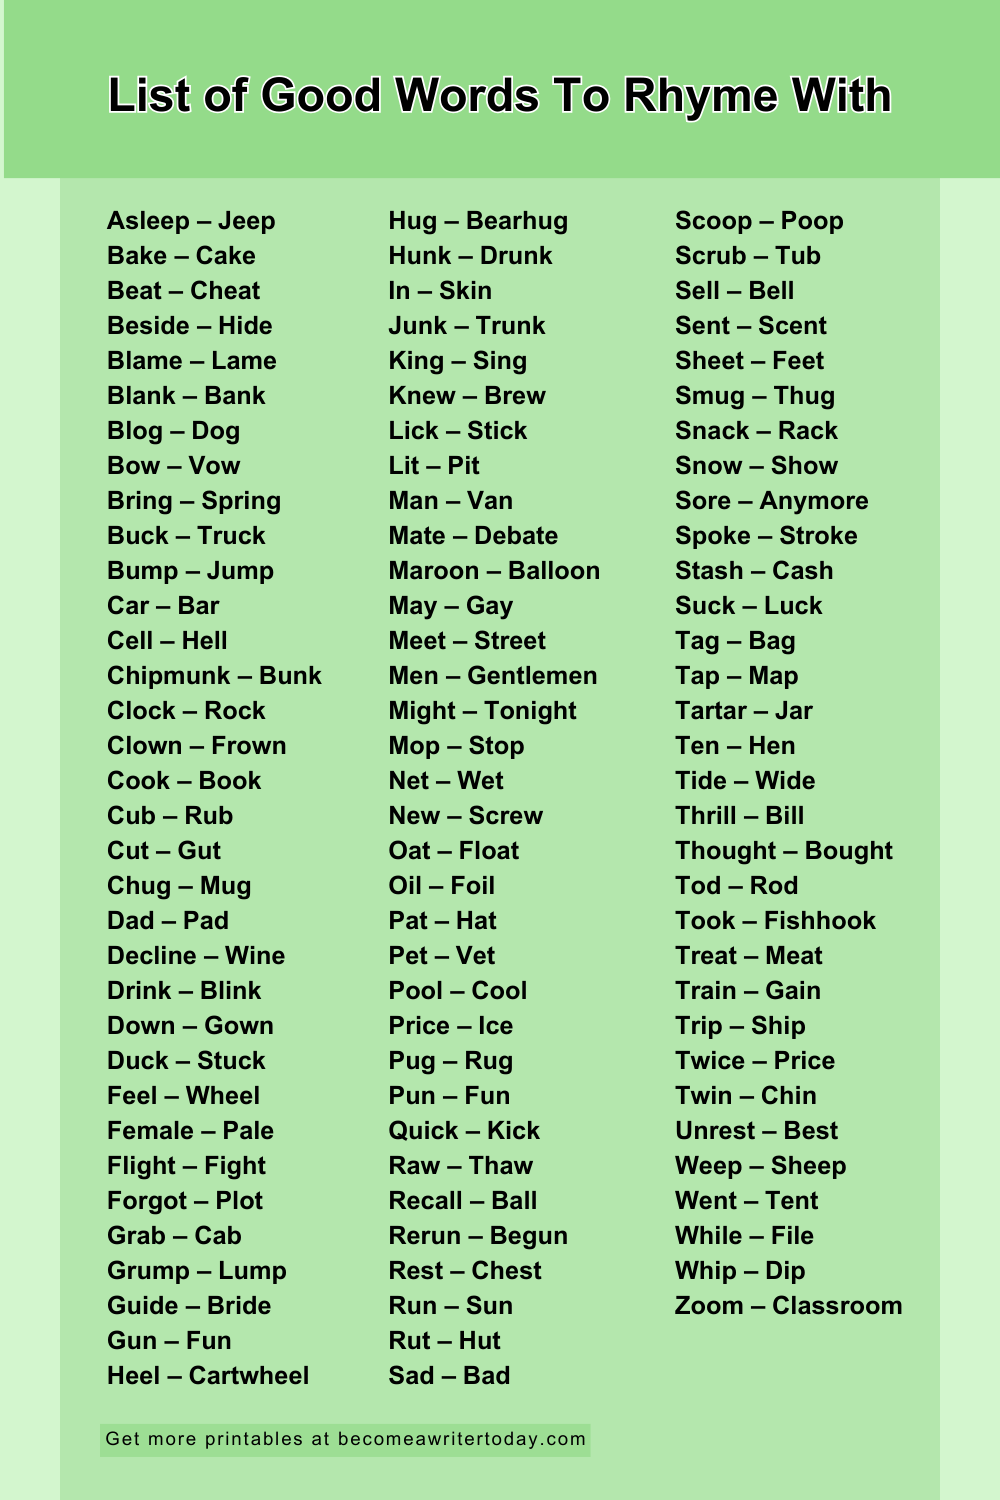 List of good words to rhyme with